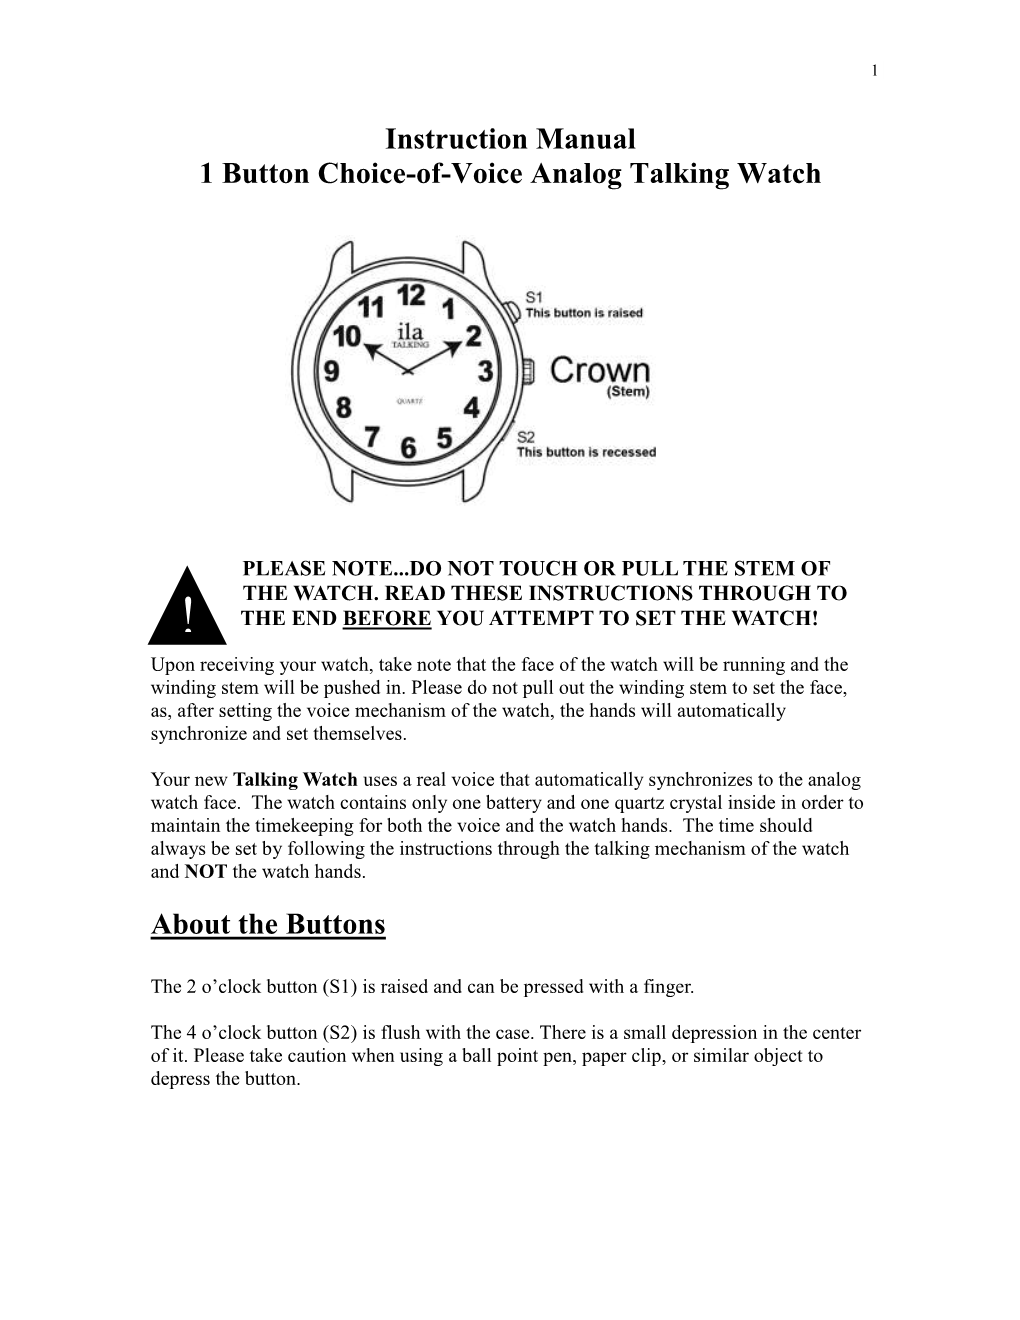 Instruction Manual 1 Button Choice-Of-Voice Analog Talking Watch